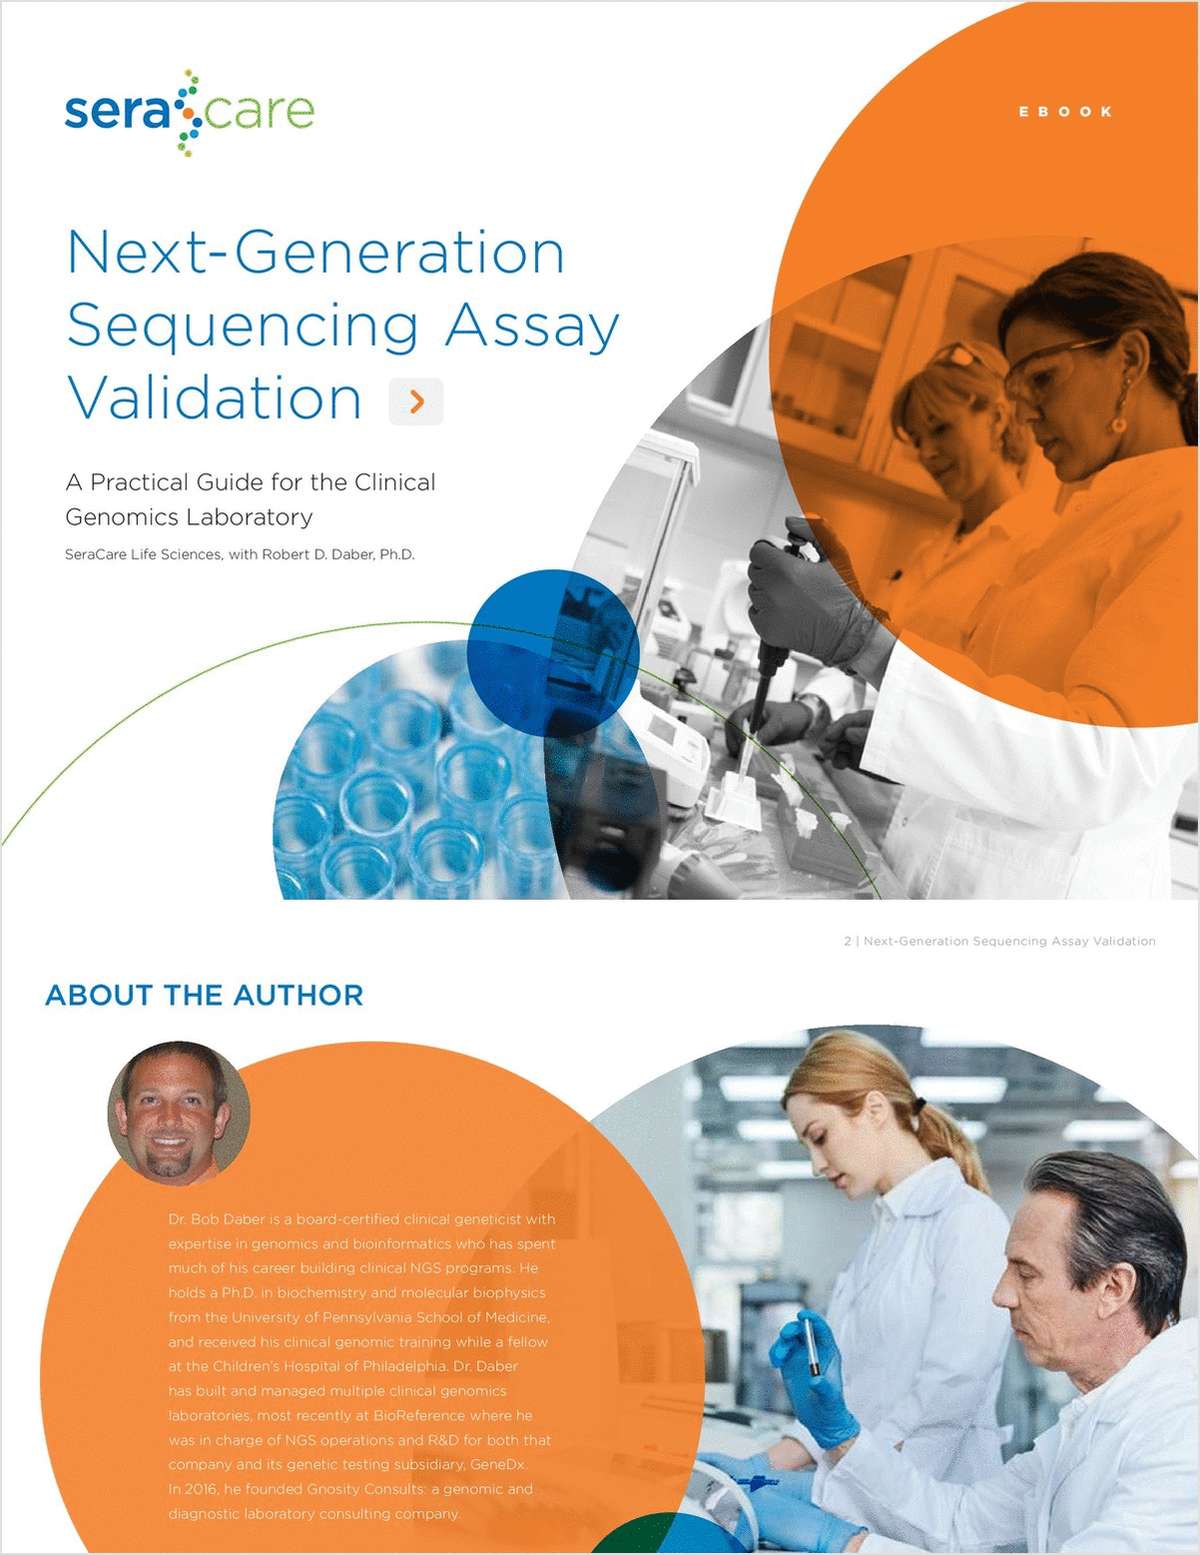 Next-Generation Sequencing Assay Validation: A Practical Guide for the Clinical Genomics Laboratory